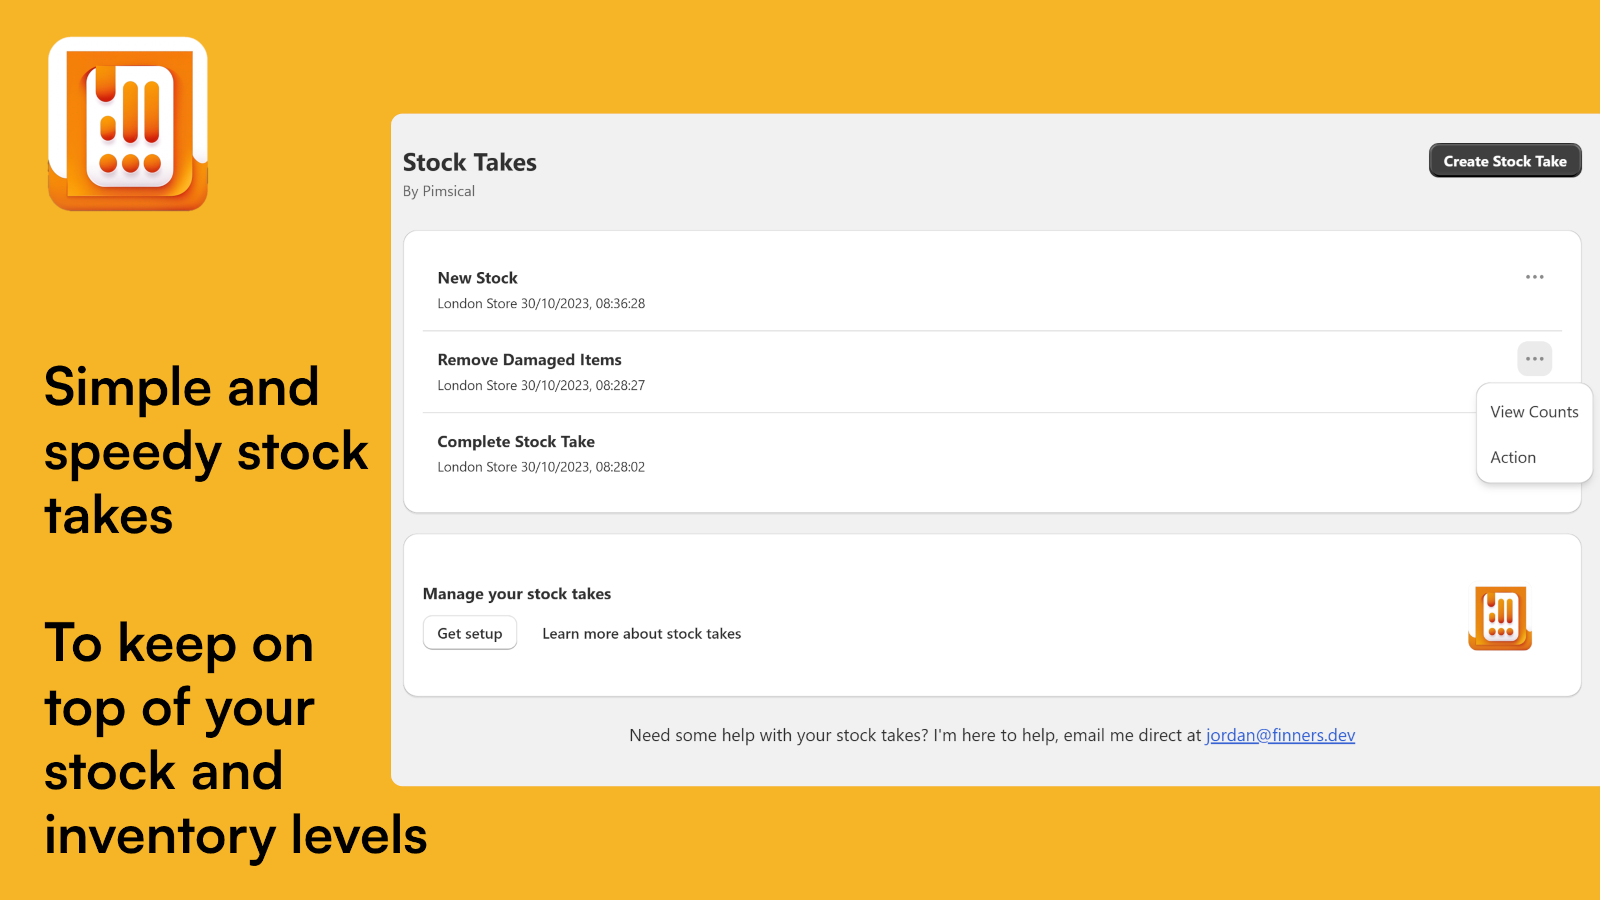 Keep on top of your stock and inventory levels